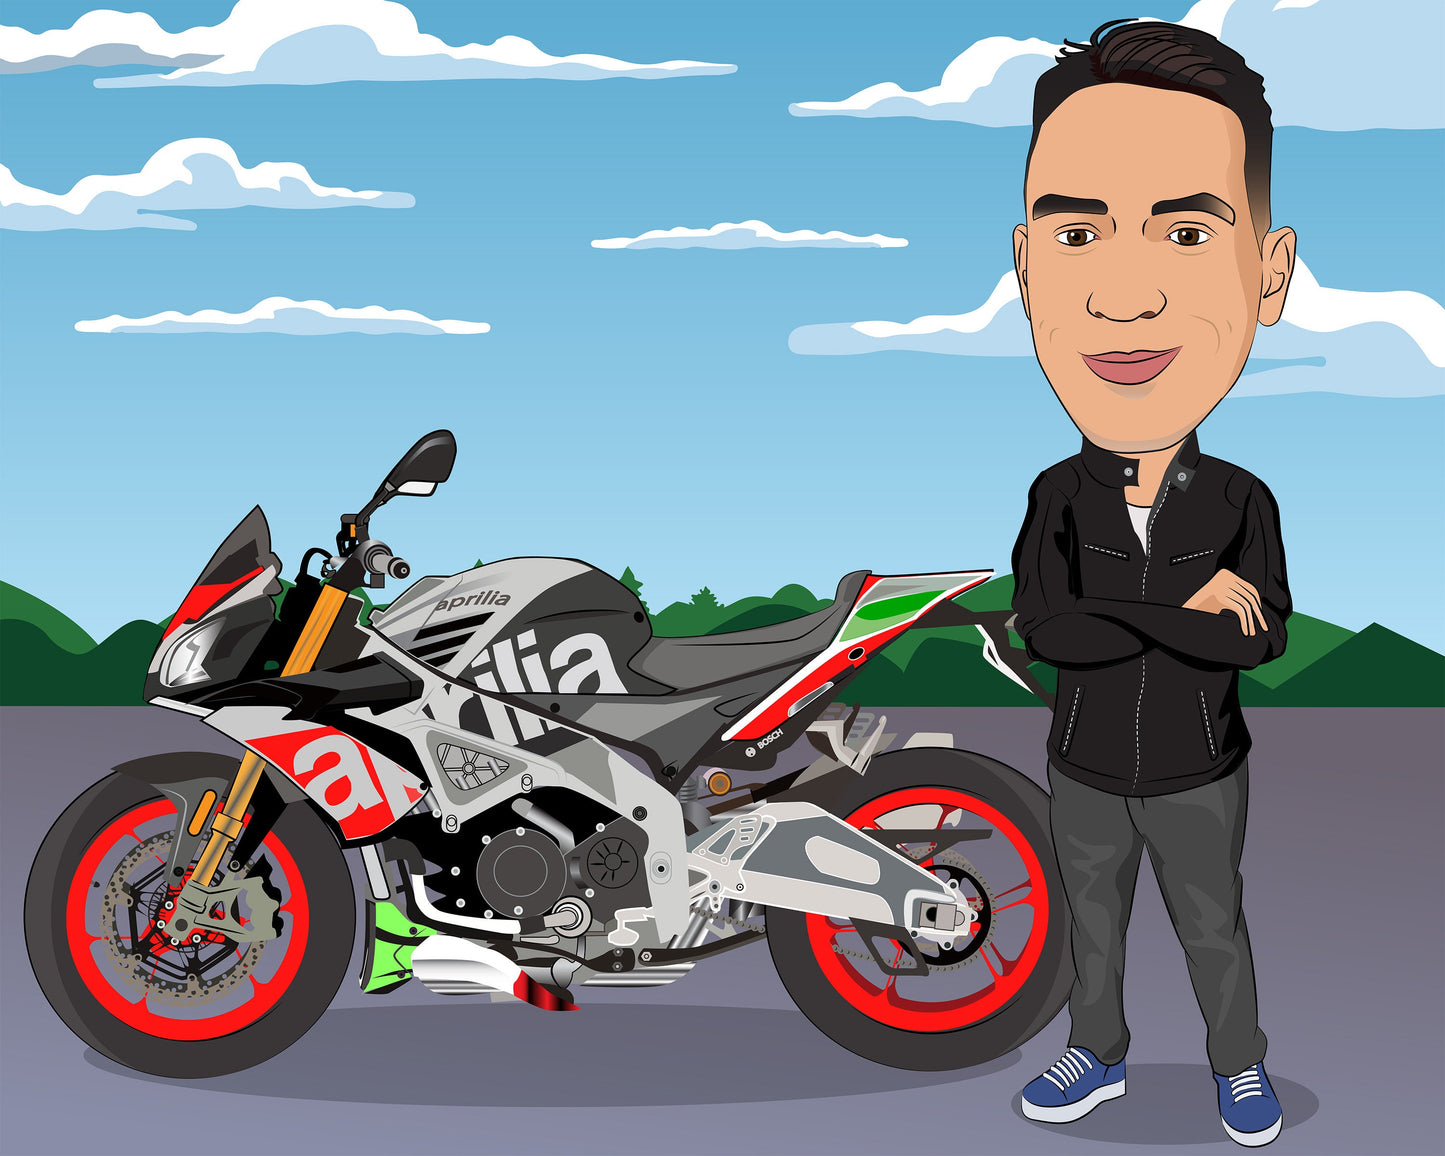 Motorcyclist Gift - Custom Caricature Portrait From Your Photo